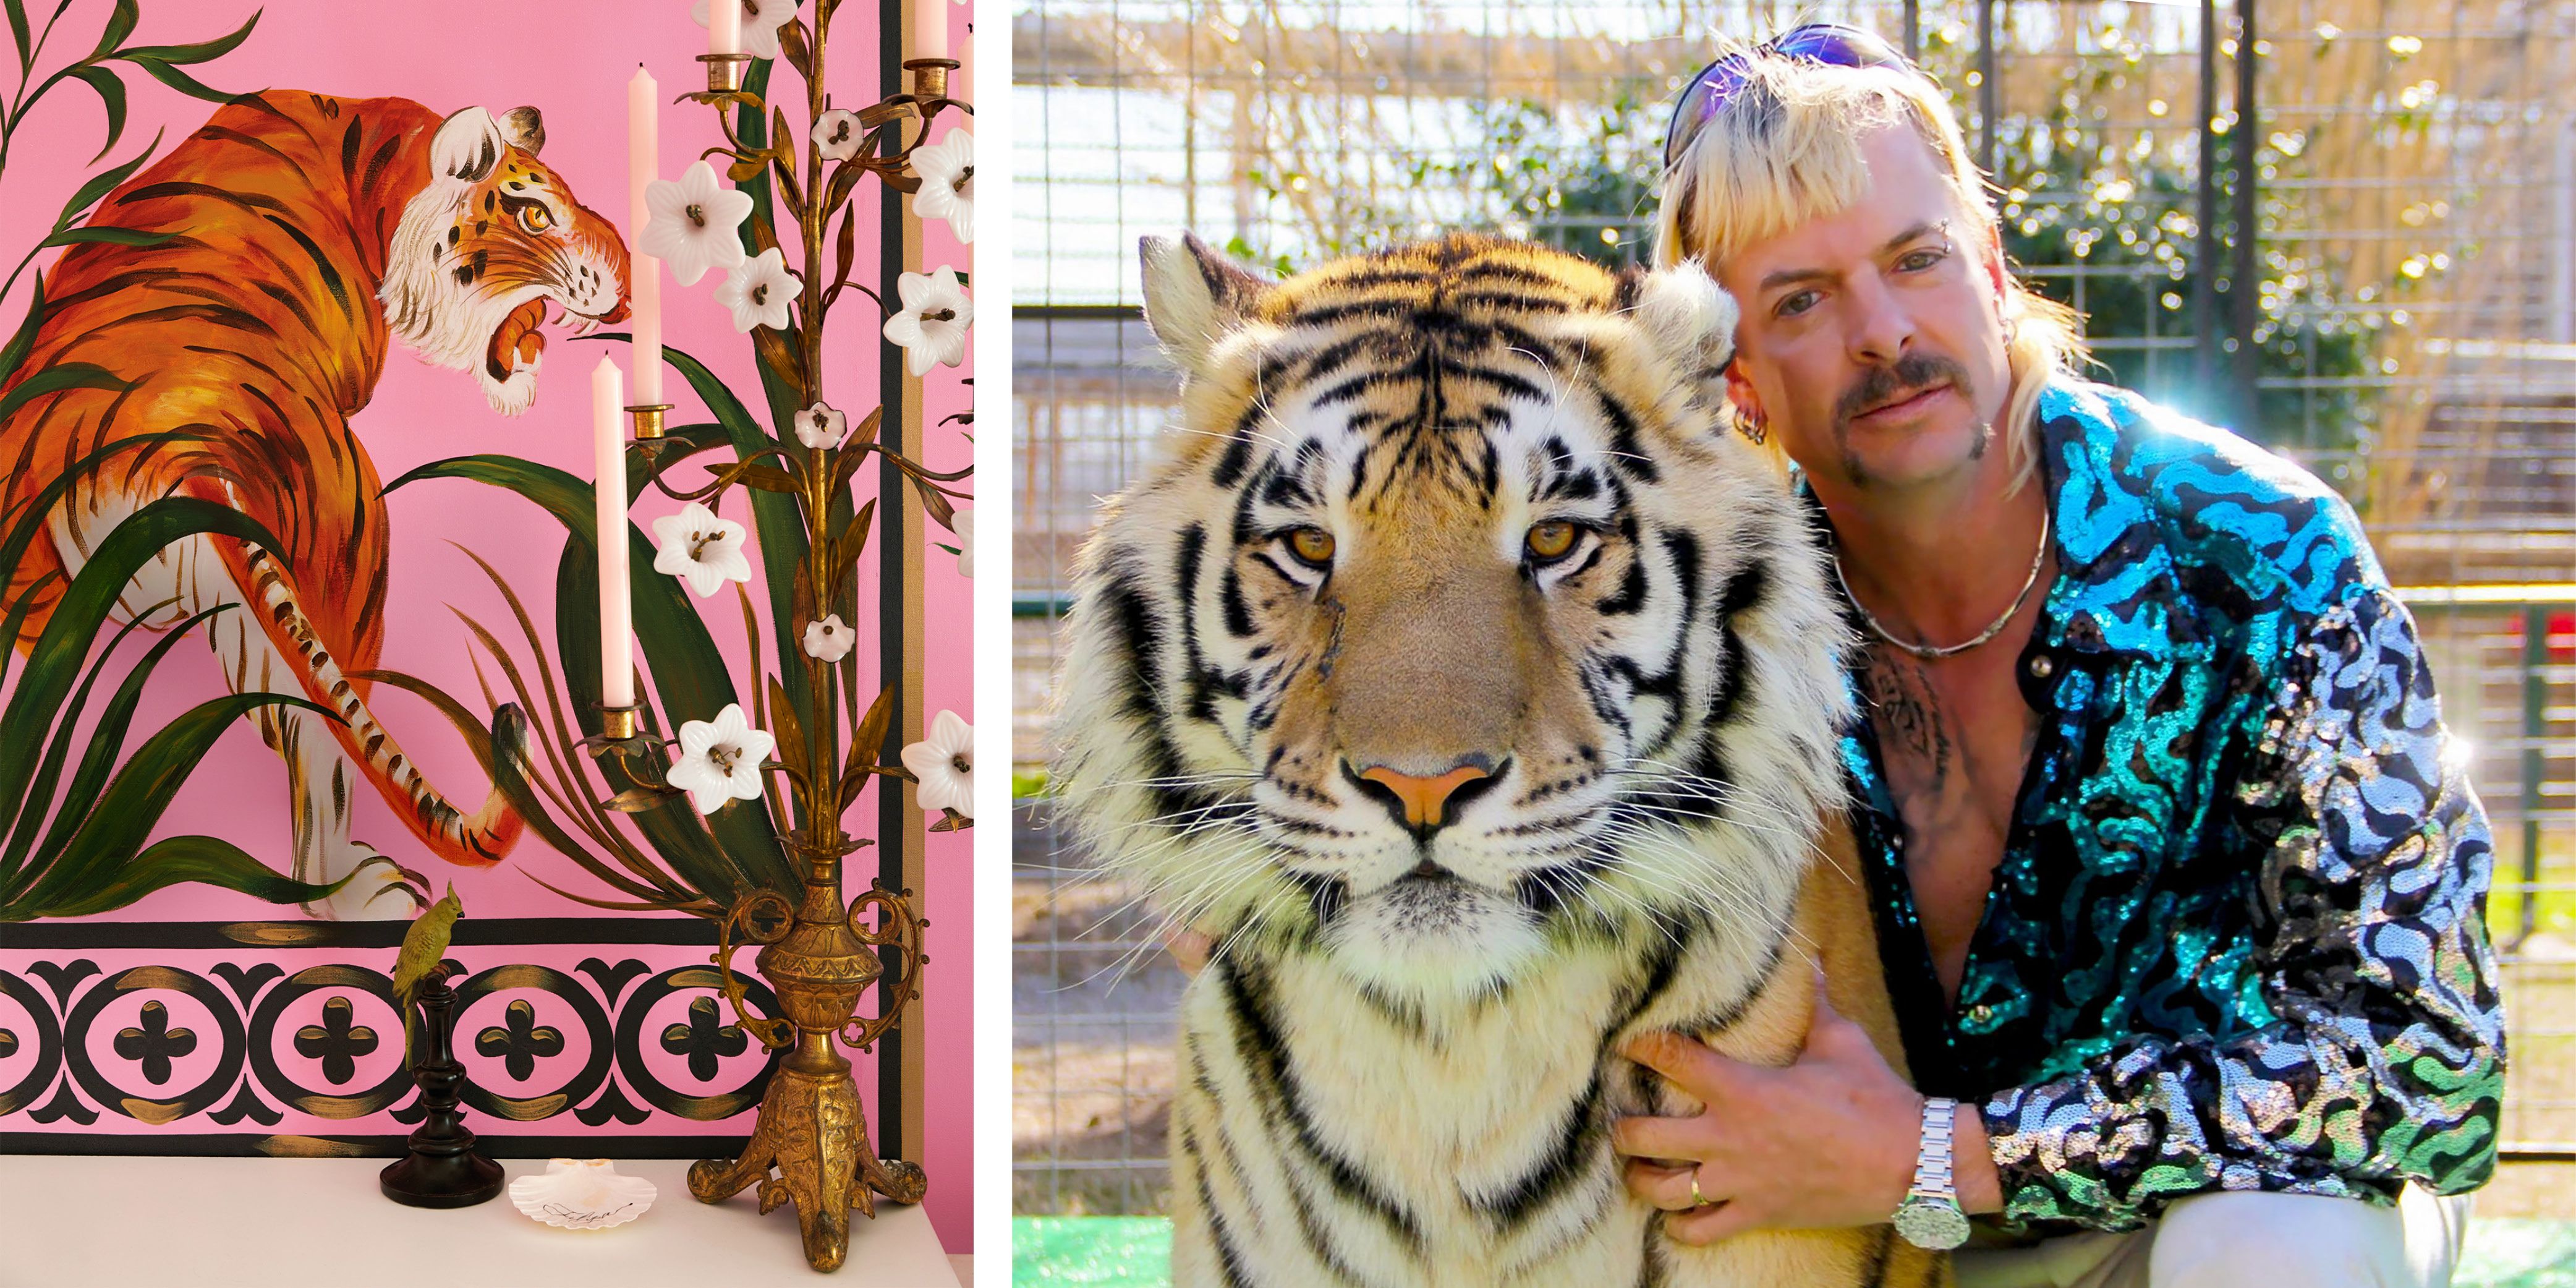 The Animal Print Clothing Trend Inspired By 'Tiger King' Is So Fierce